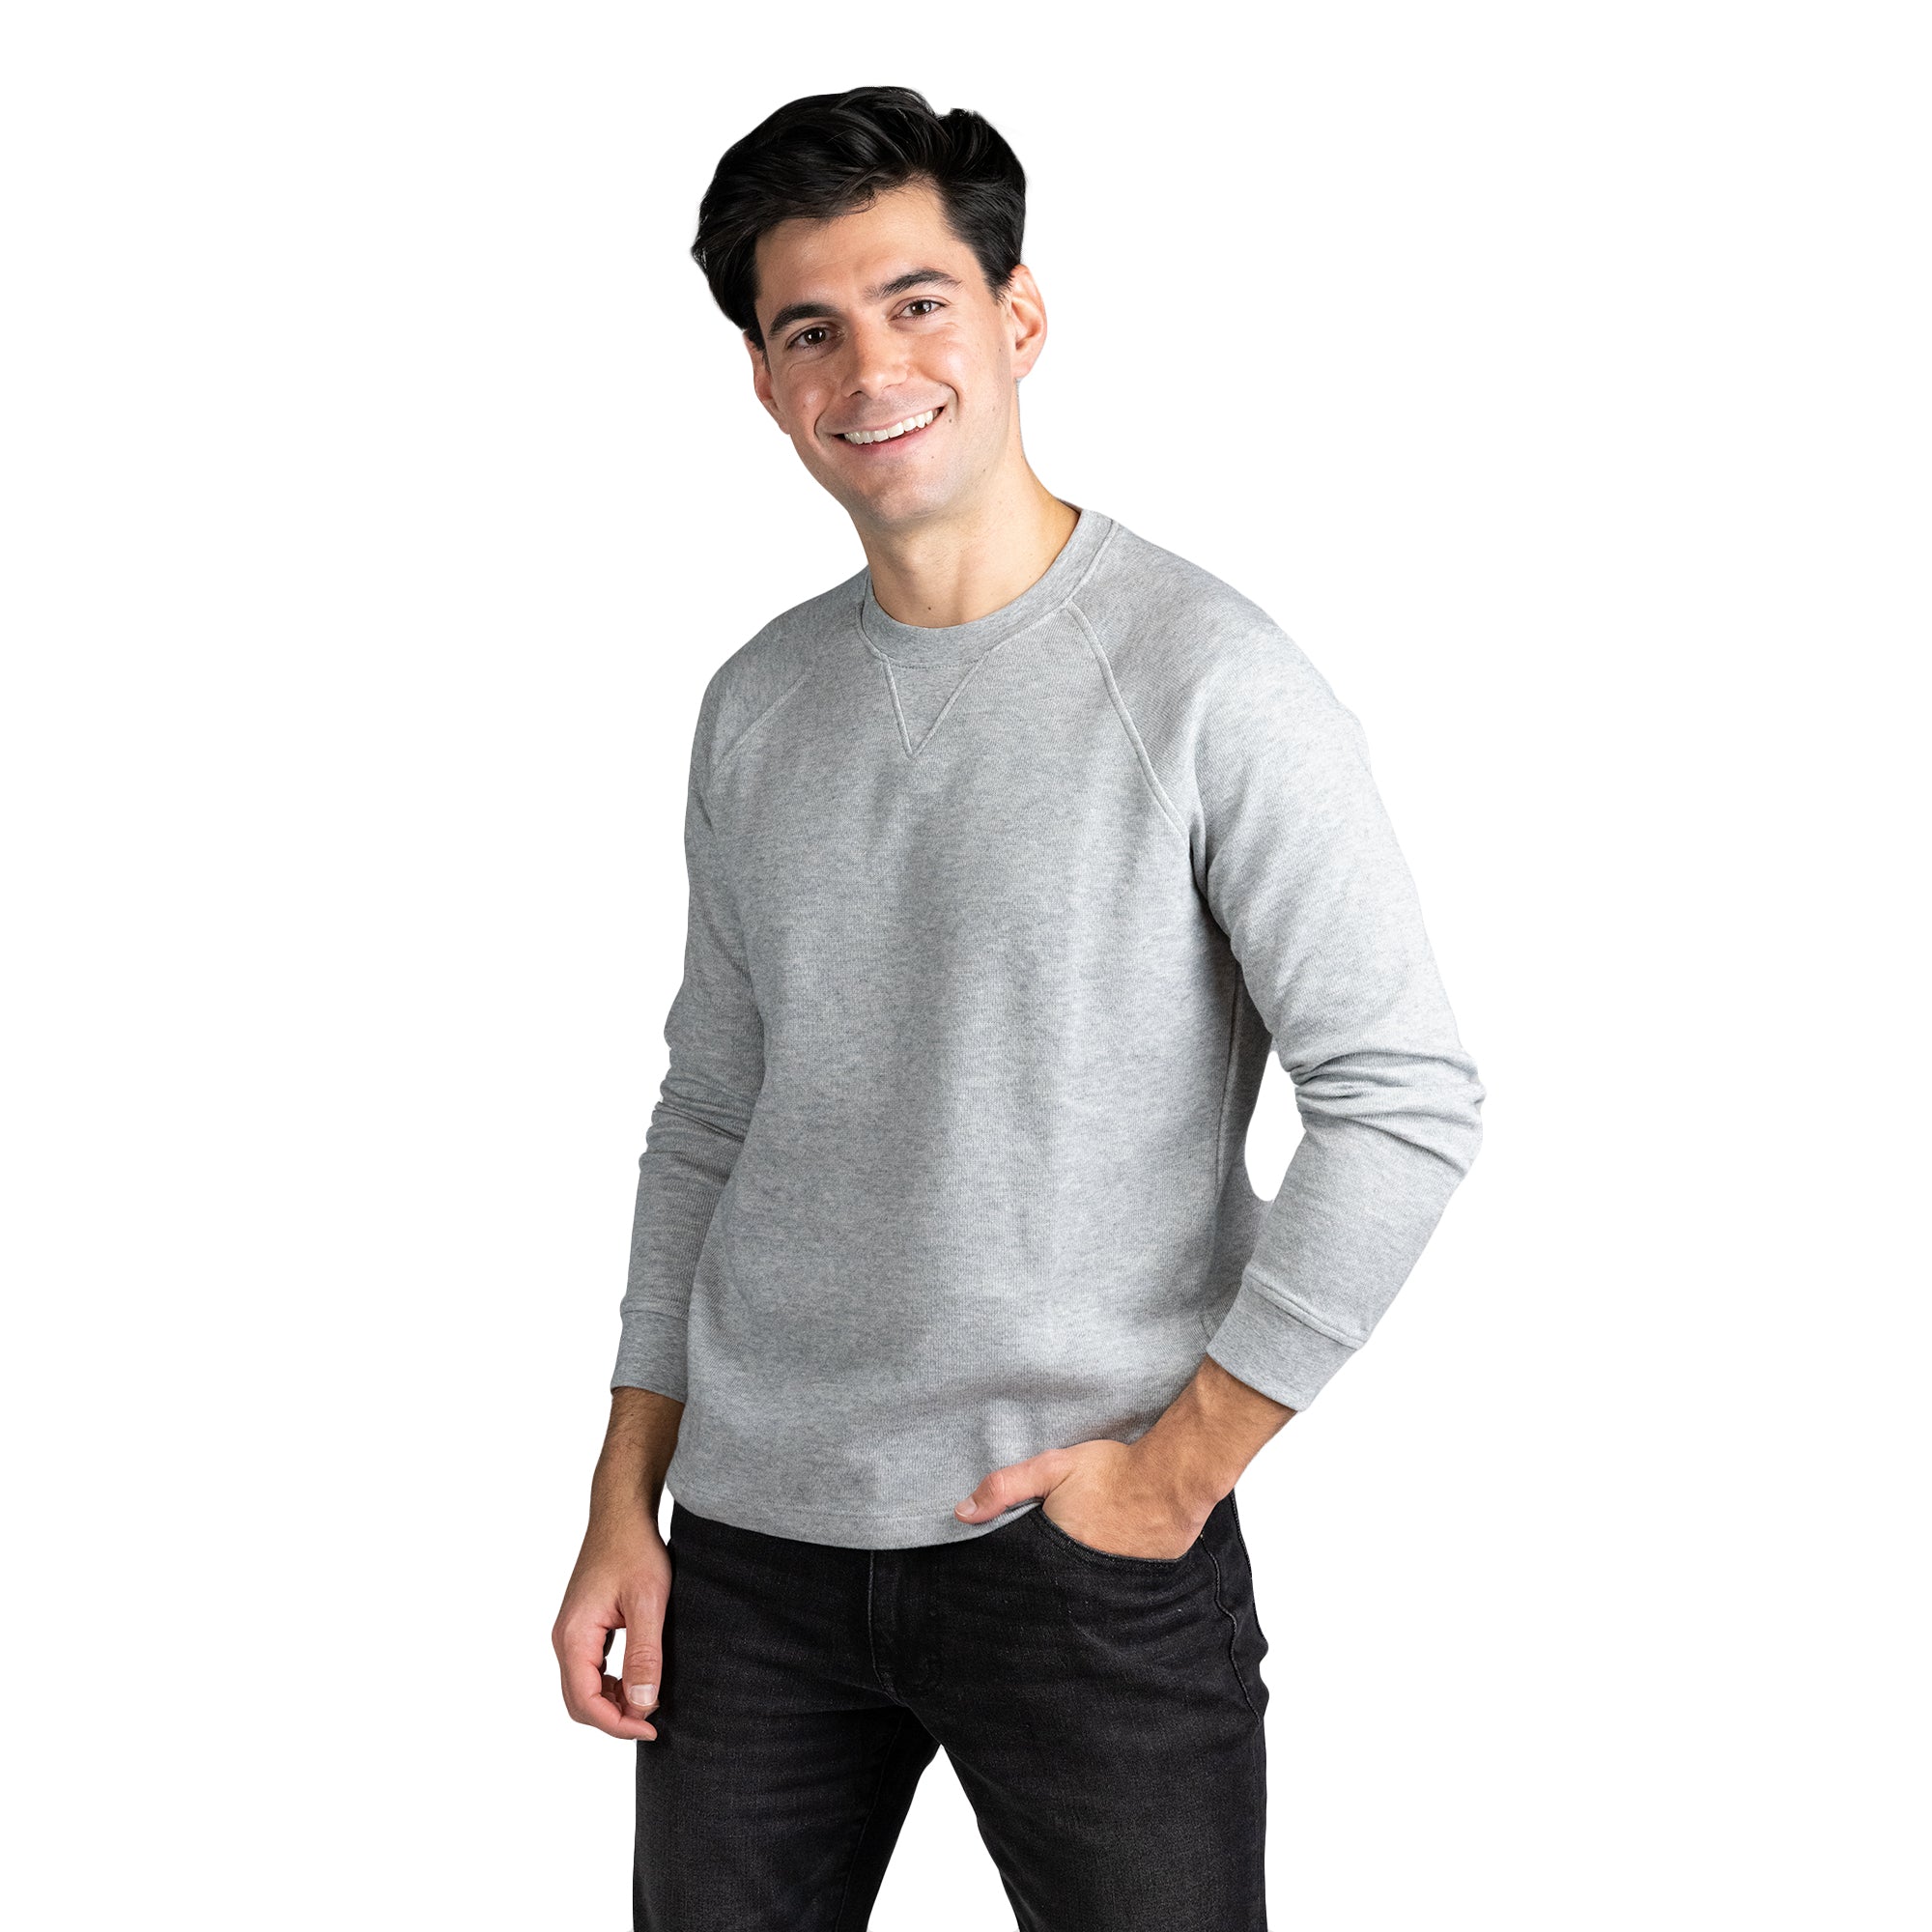 Cotton Pullovers, Heather Grey | Peter Manning NYC